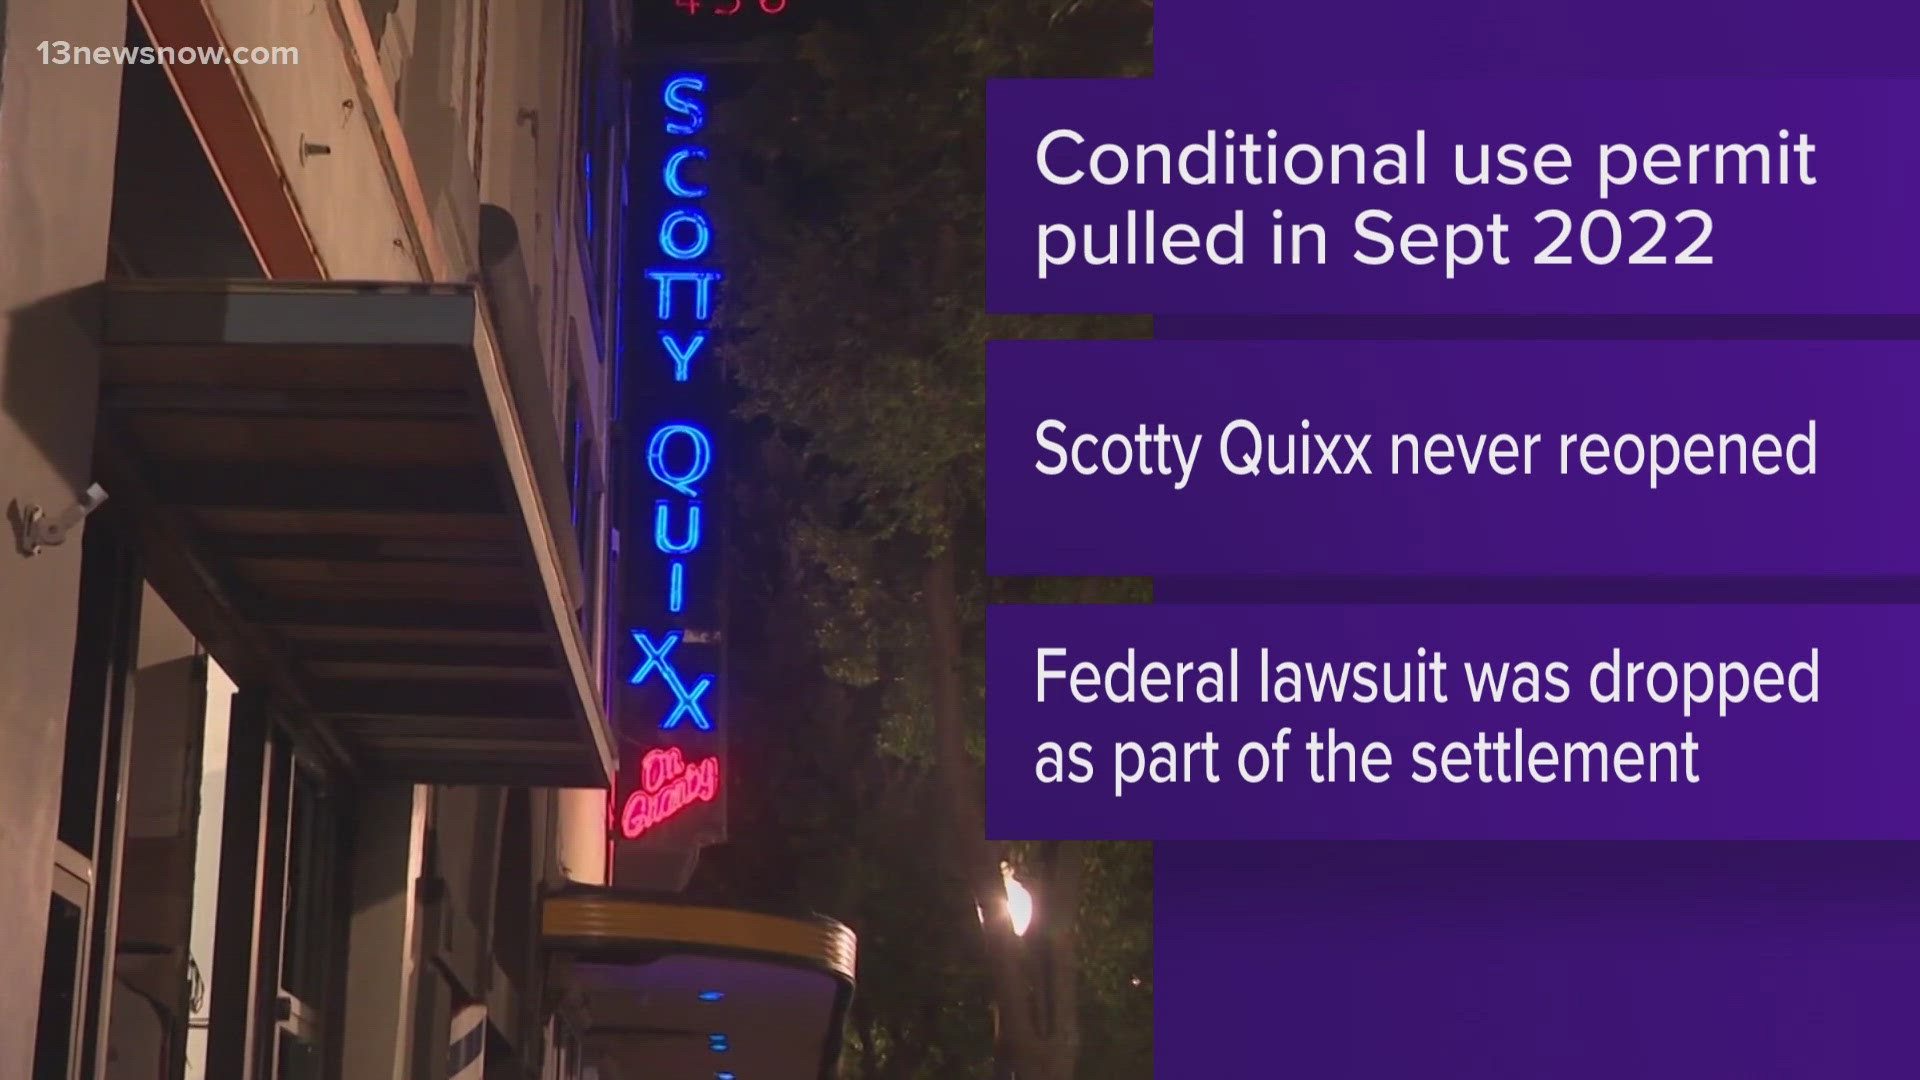 Former Downtown Norfolk nightclub "Scotty Quixx" got a $200,000 settlement from the city -- nearly two years after the club's conditional use permit was revoked.